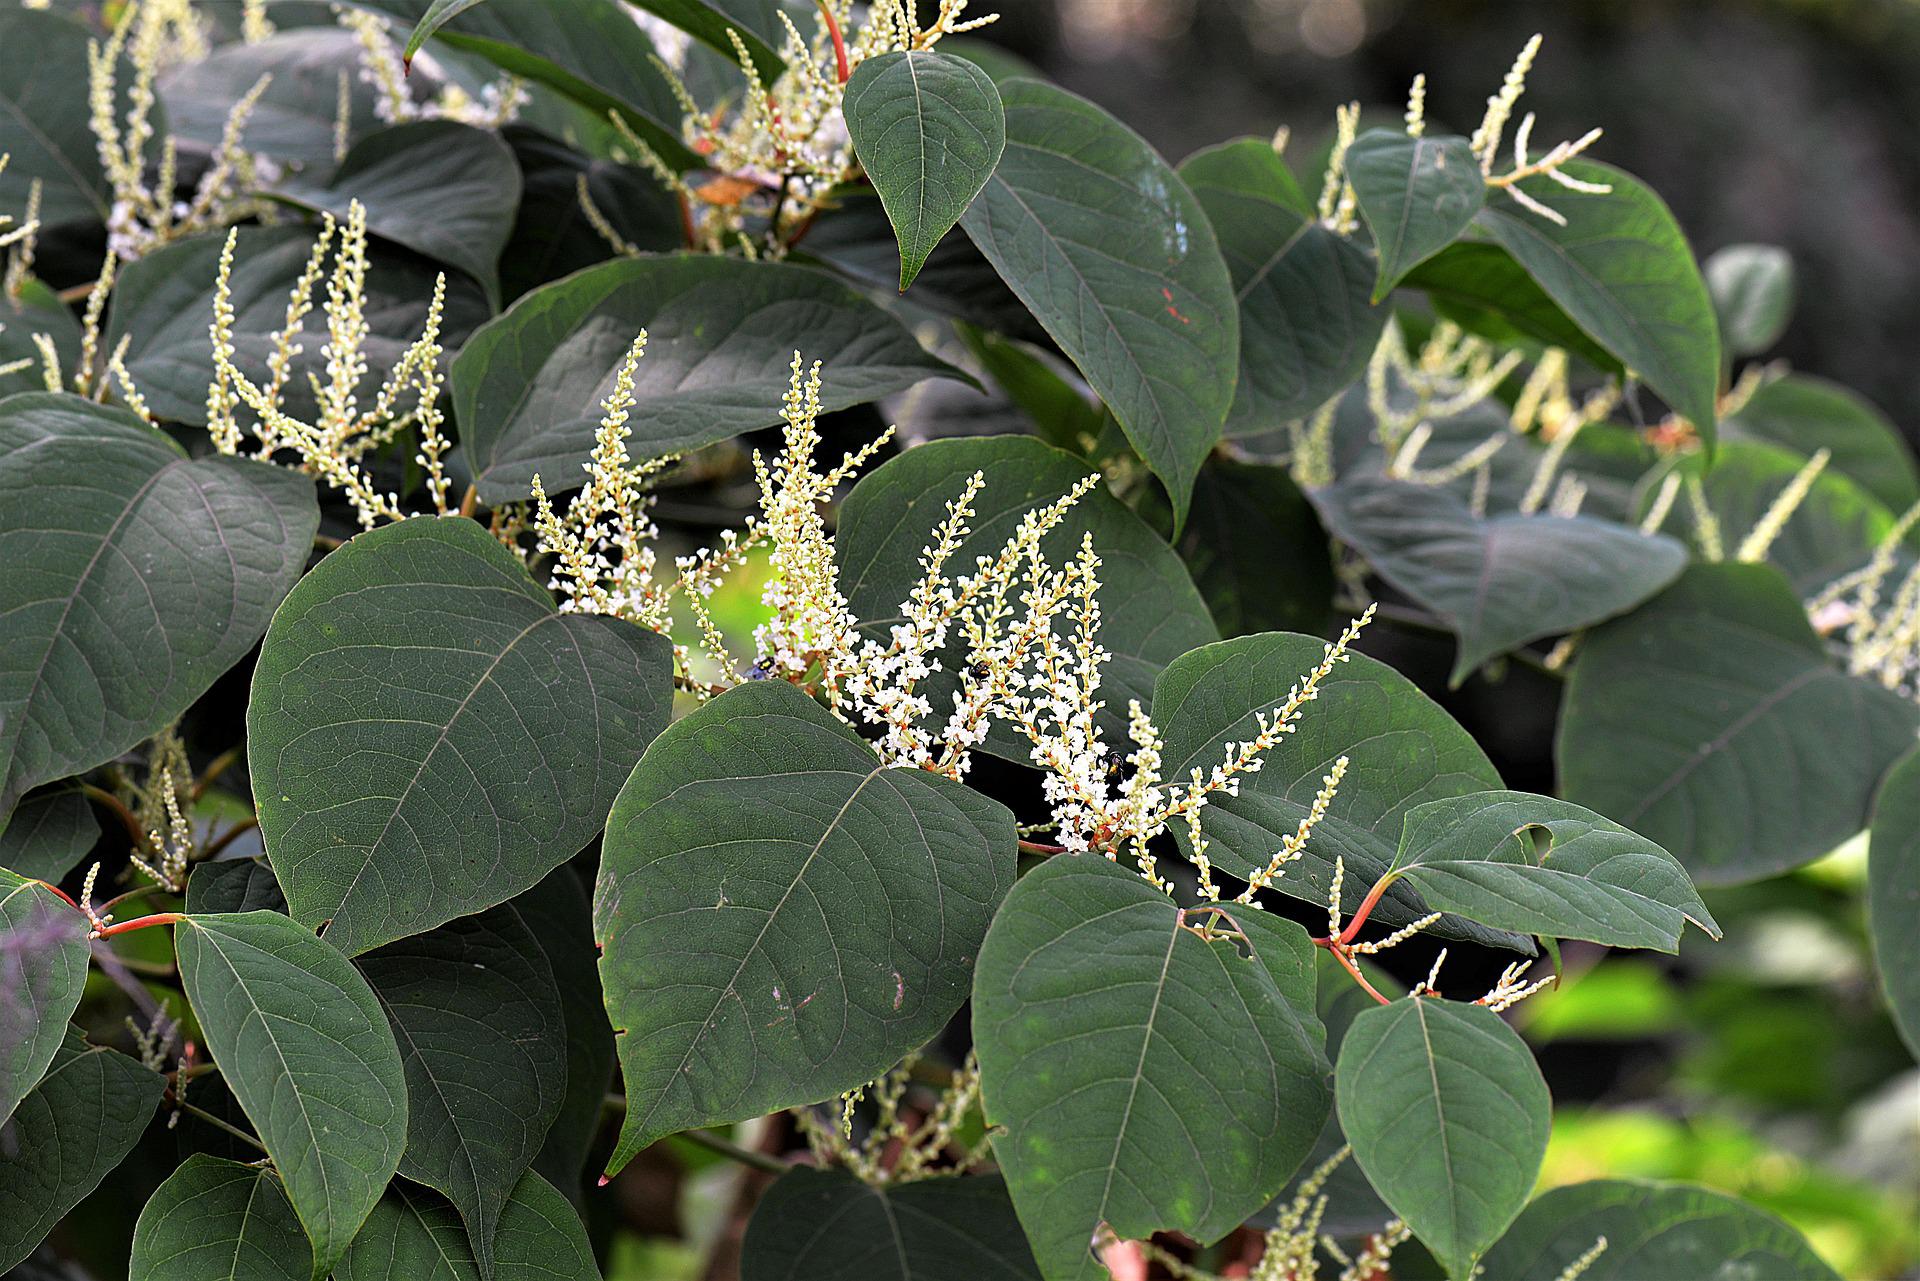 Why is Japanese Knotweed so dangerous to your property?